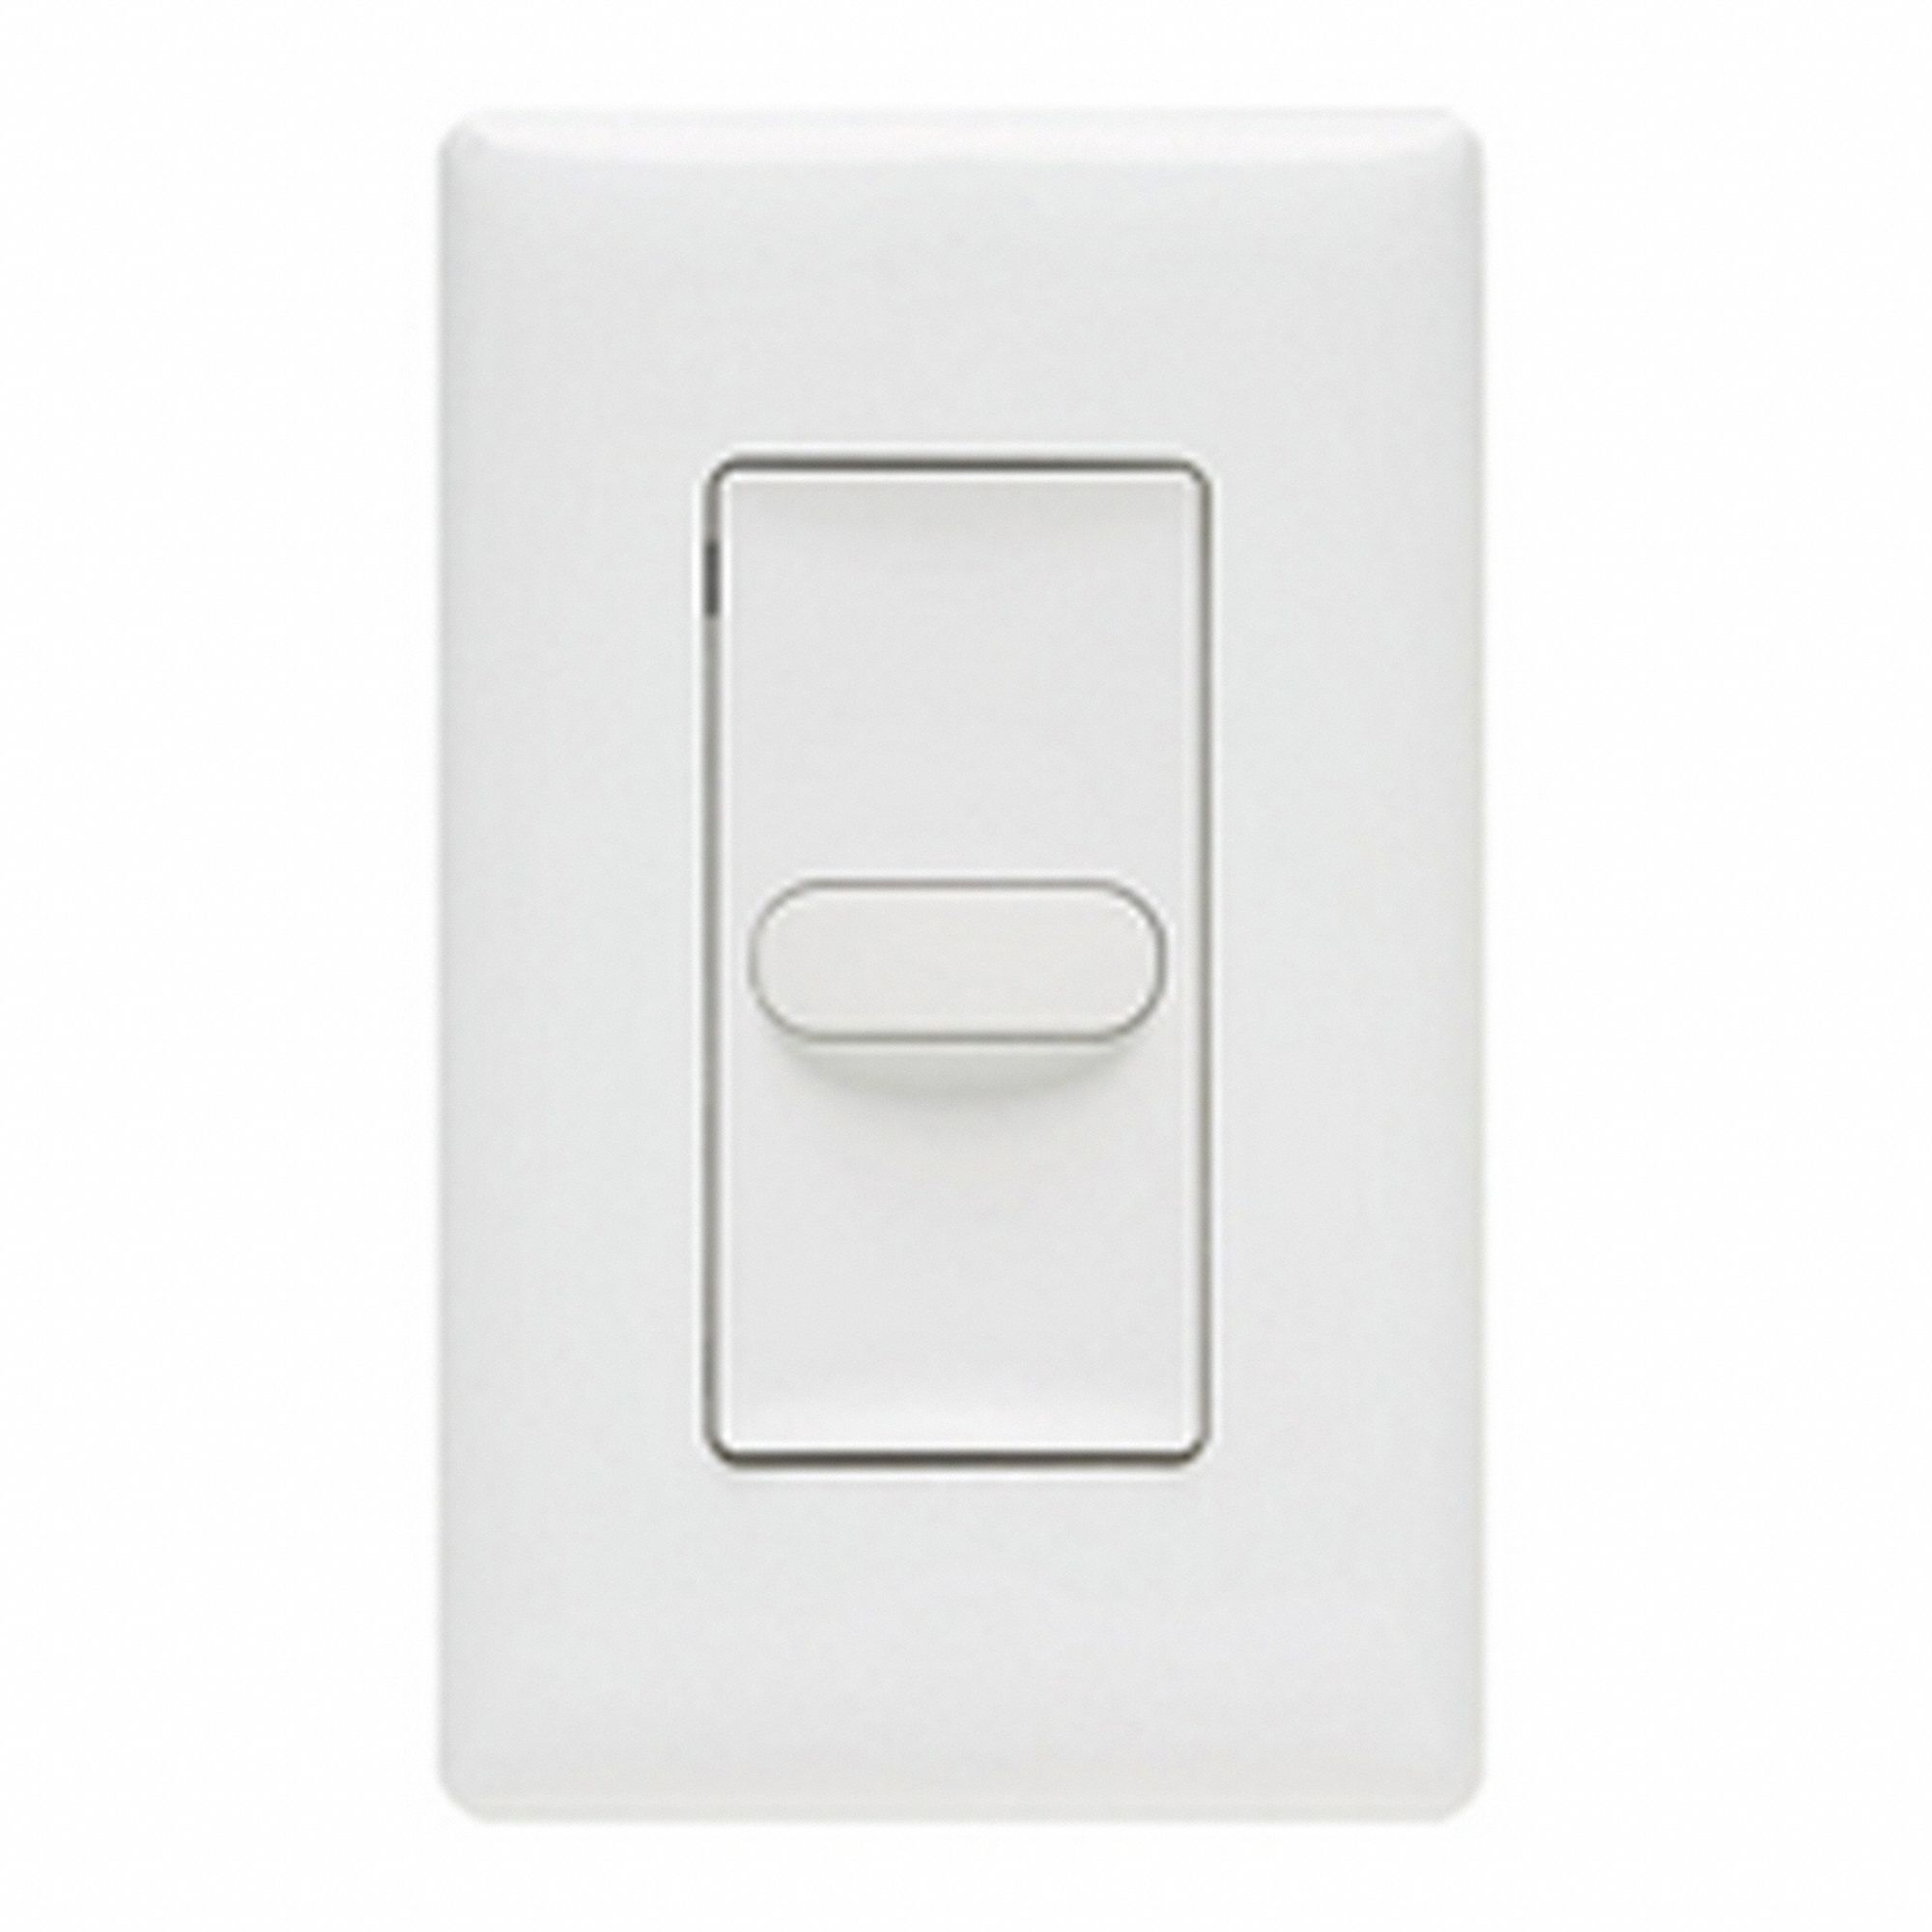 LOW-VOLT MOMENTARY 3 BUTTON WALL SWITCH